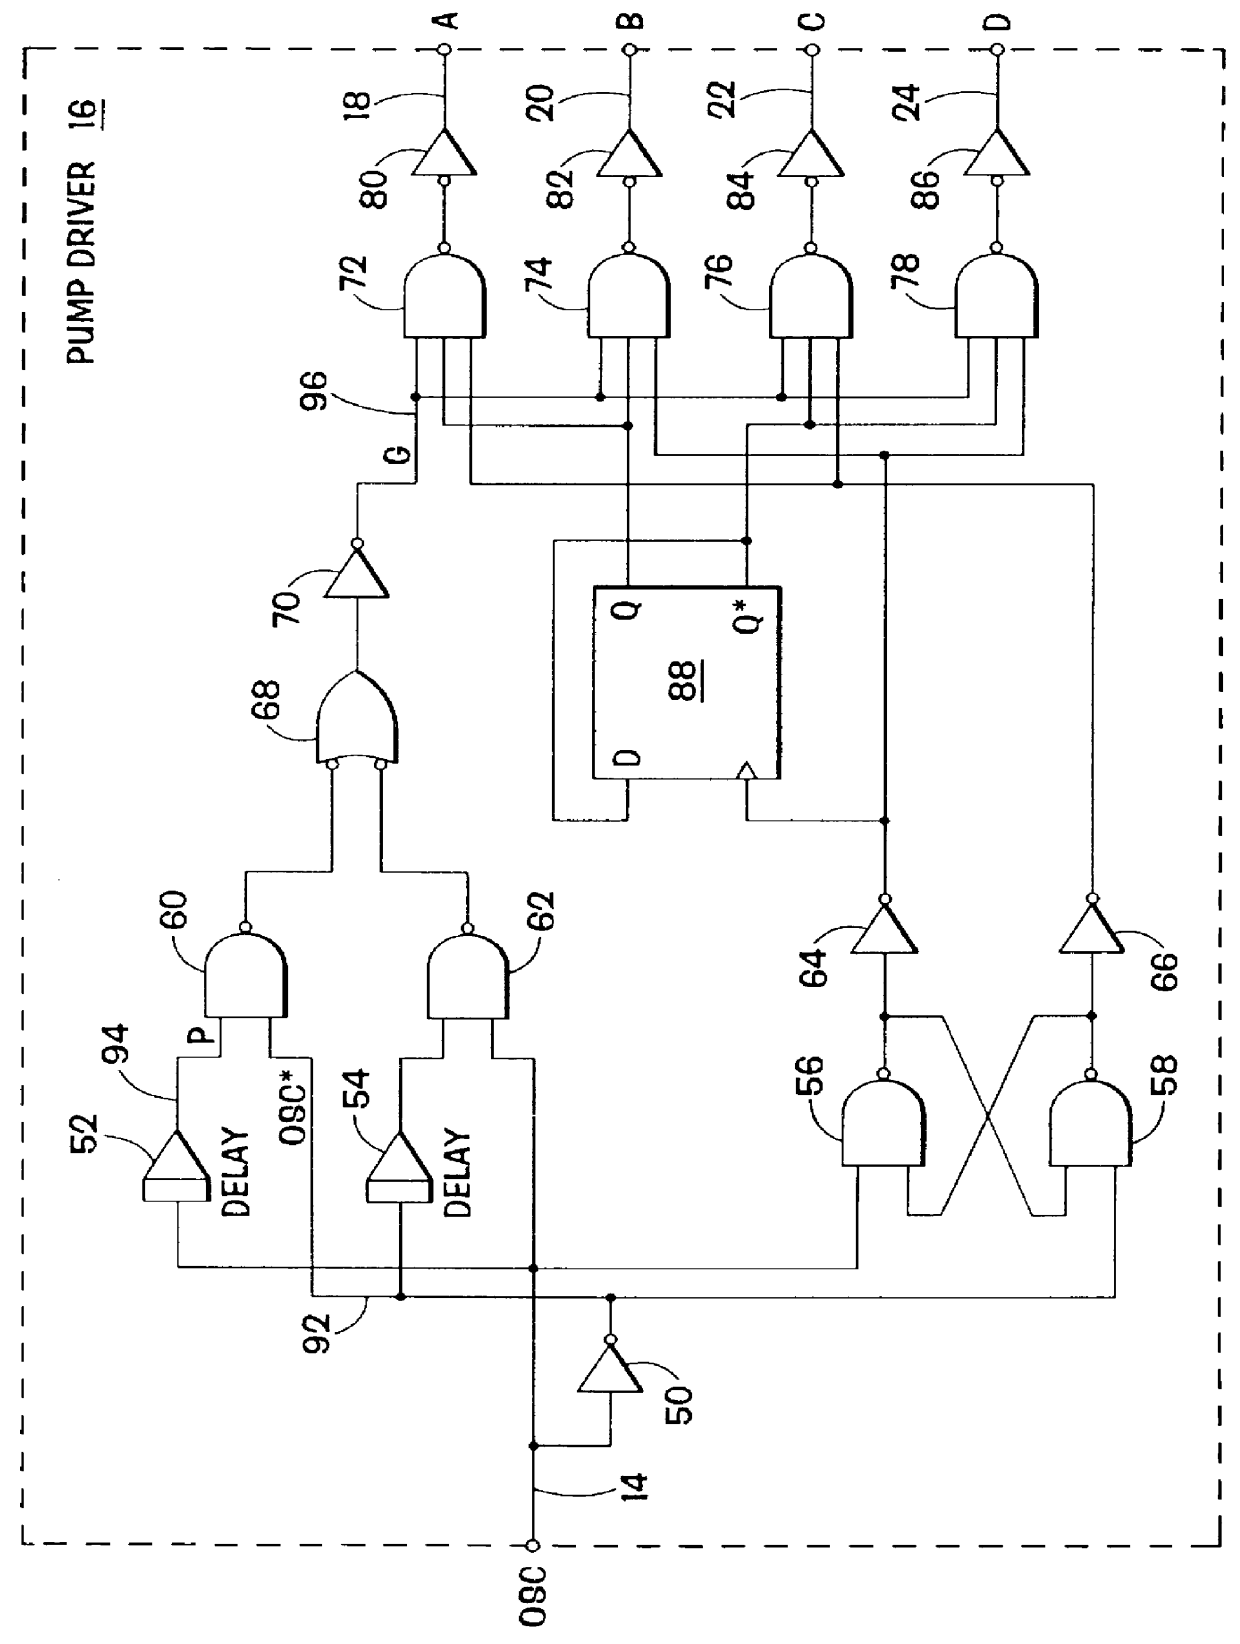 Protection circuit for use during burn-in testing